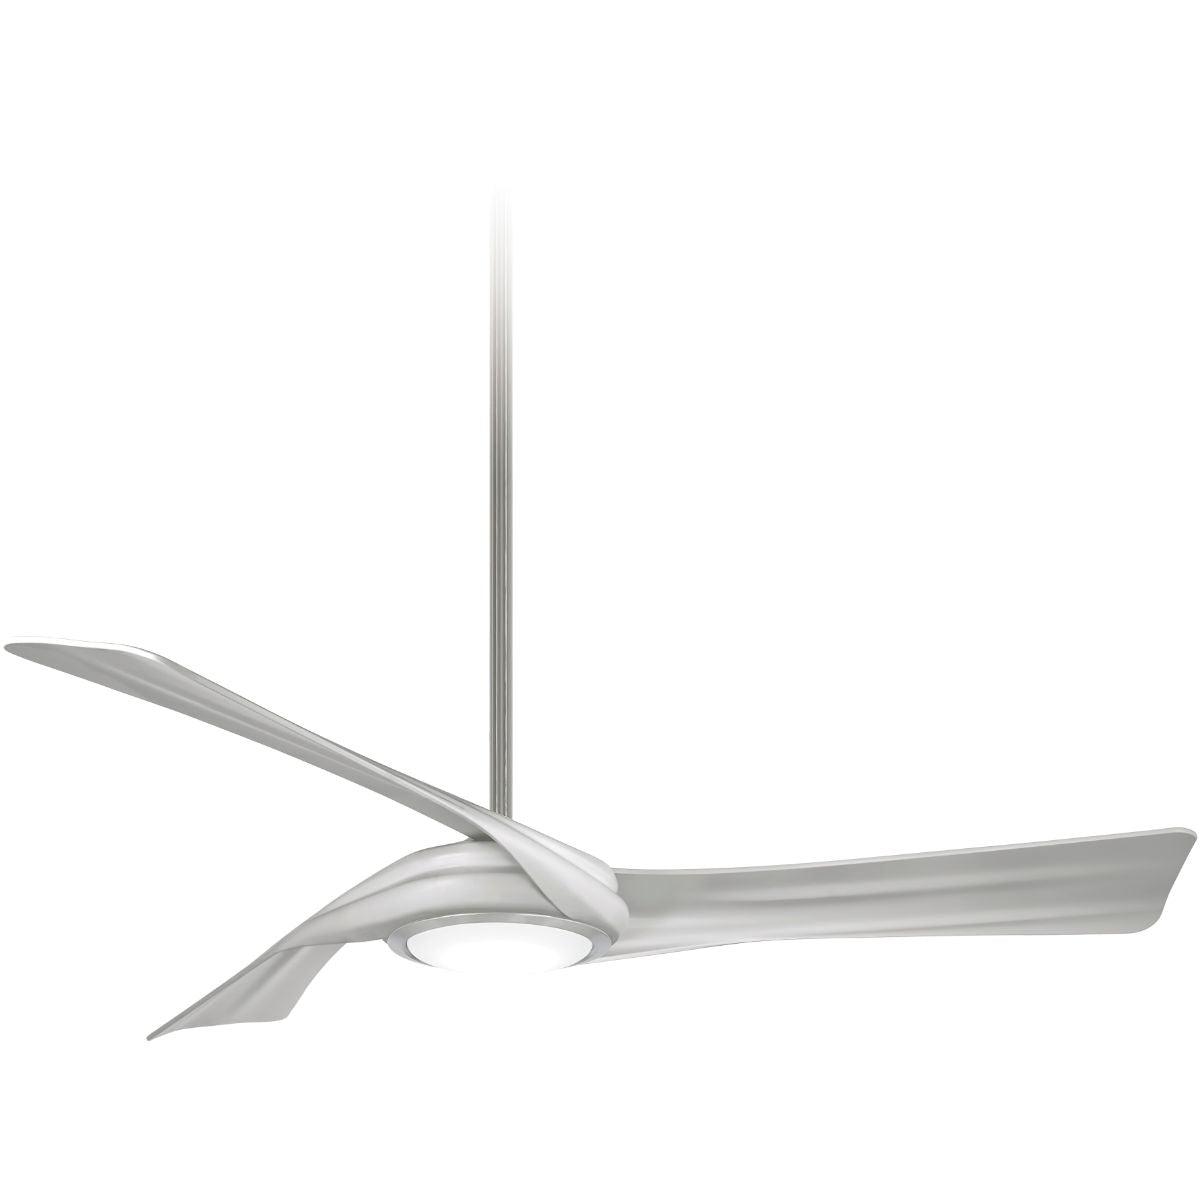 Curl 60 Inch Contemporary Smart Ceiling Fan With Light And Remote